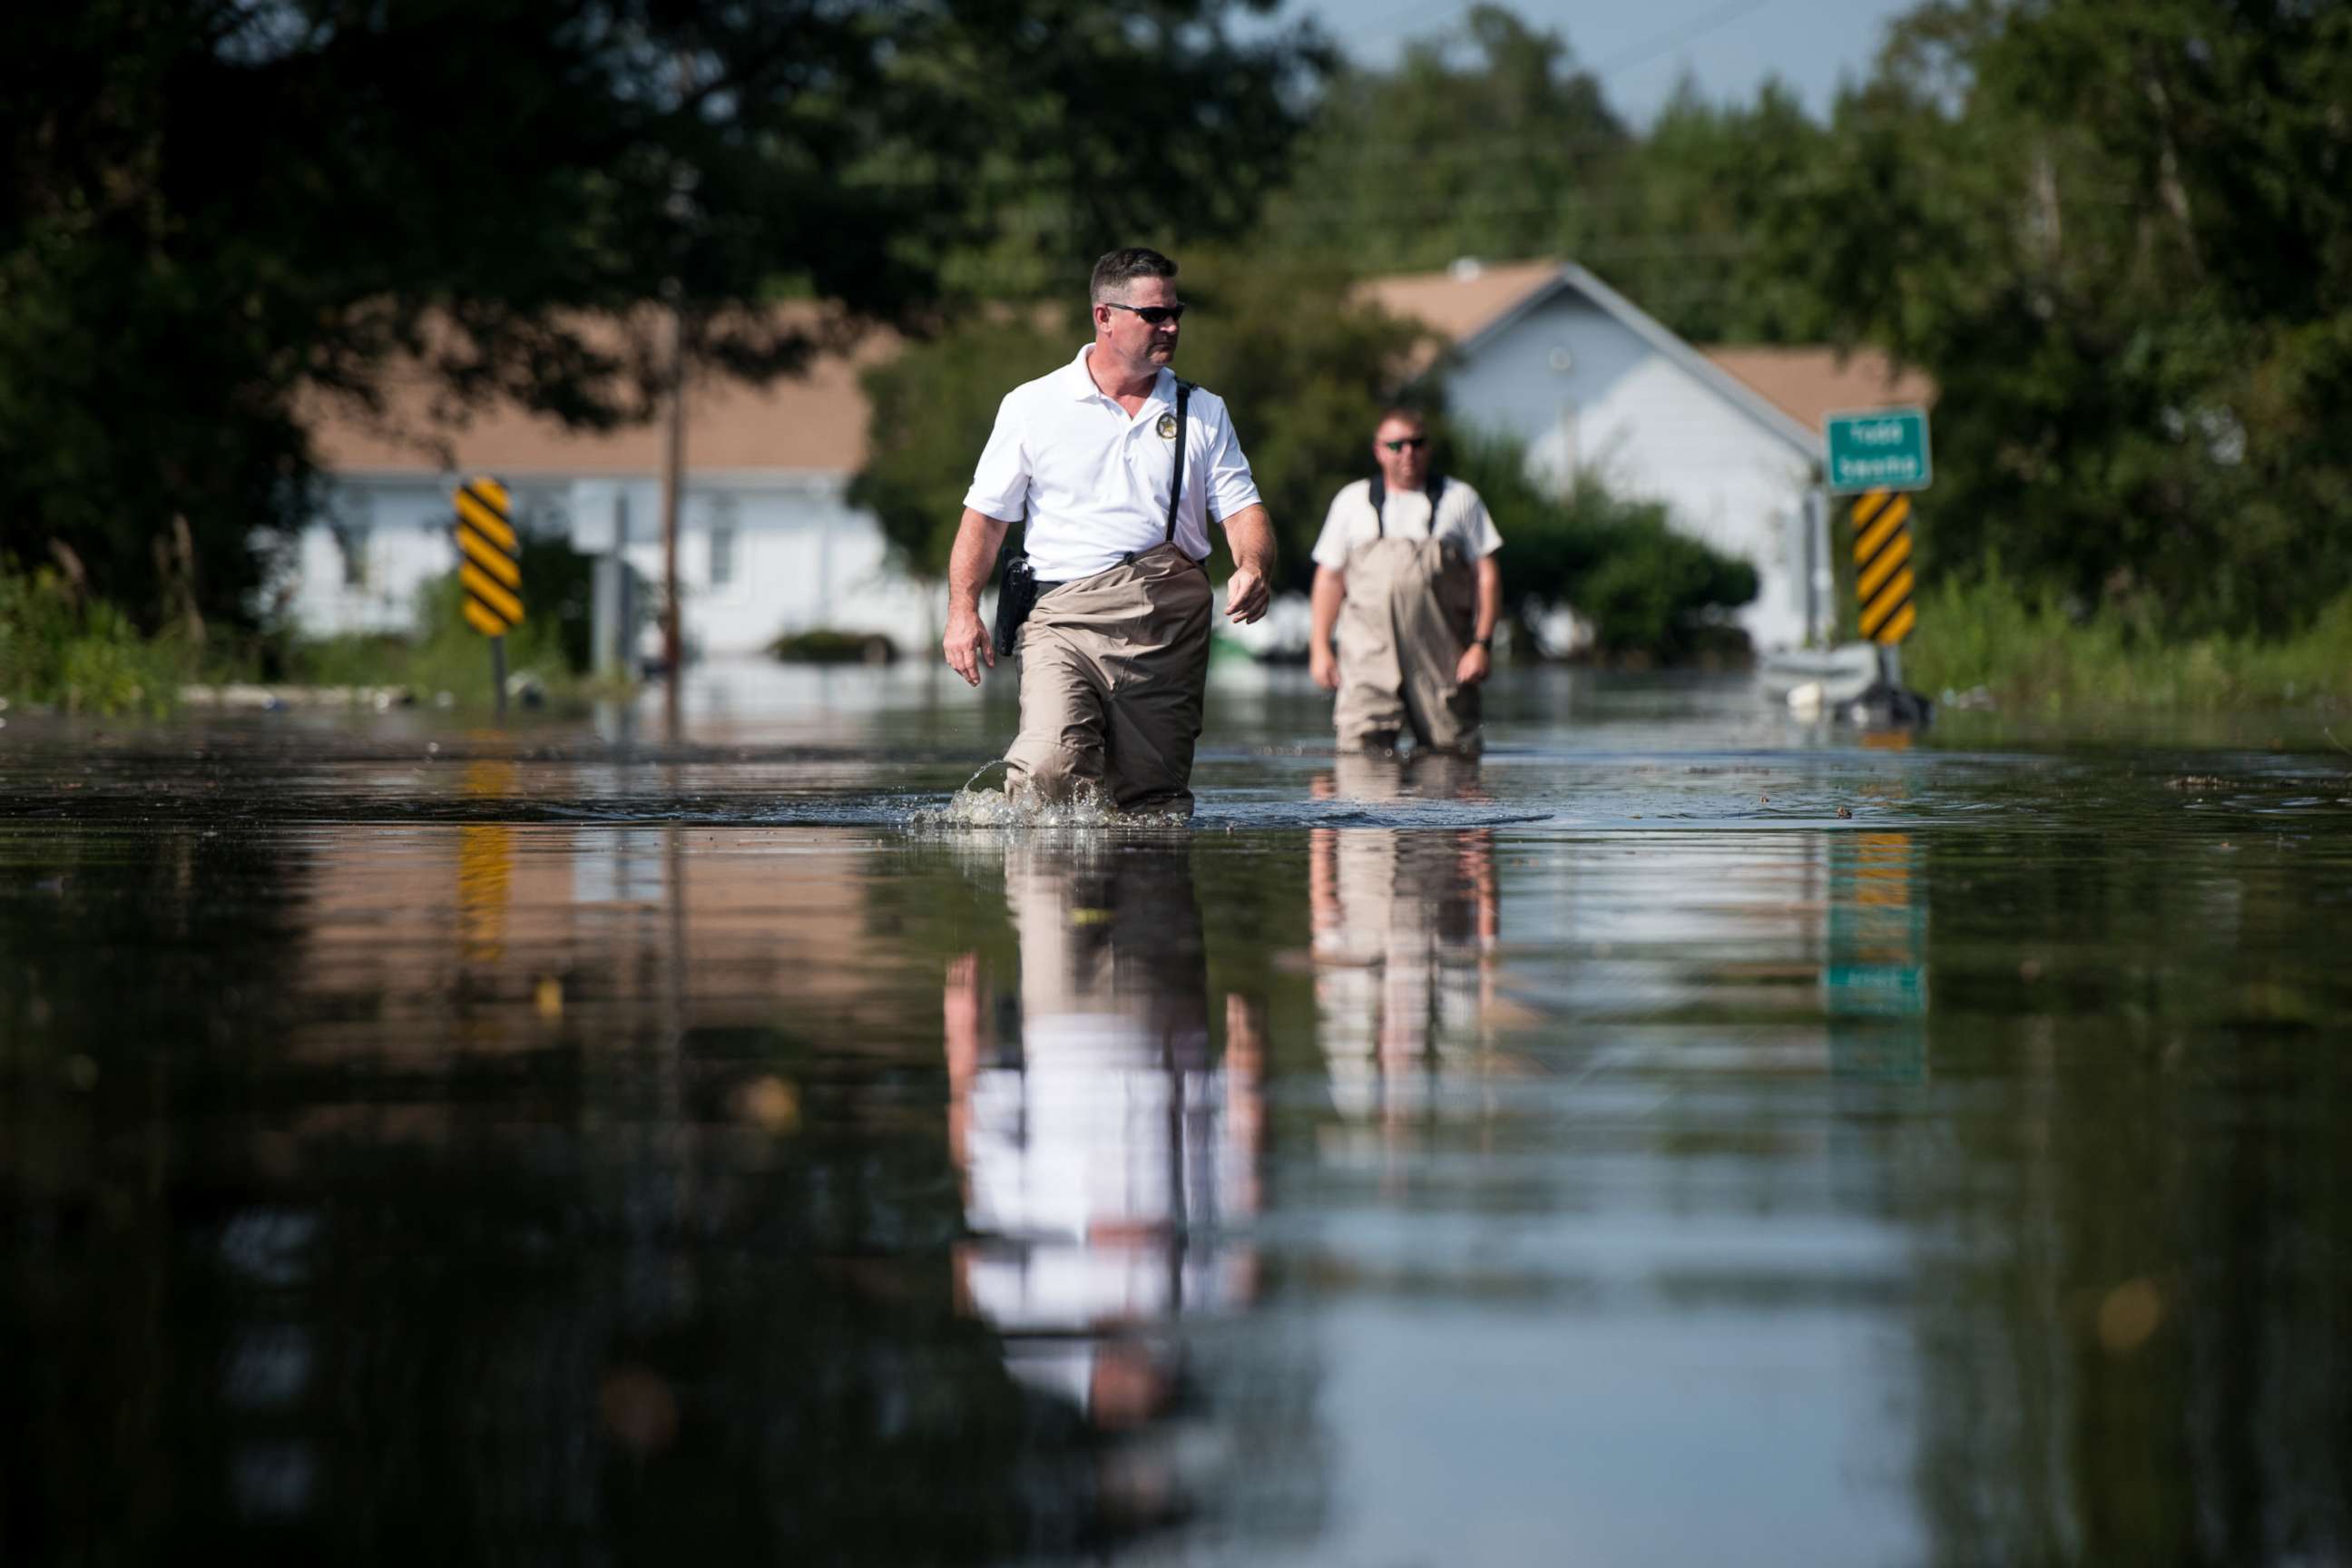 PHOTO: A Department of Natural Resources officer, left, and a South Carolina Law Enforcement agent walk through floodwaters caused by Hurricane Florence near the Todd Swamp, Sept. 21, 2018, in Longs, South Carolina.